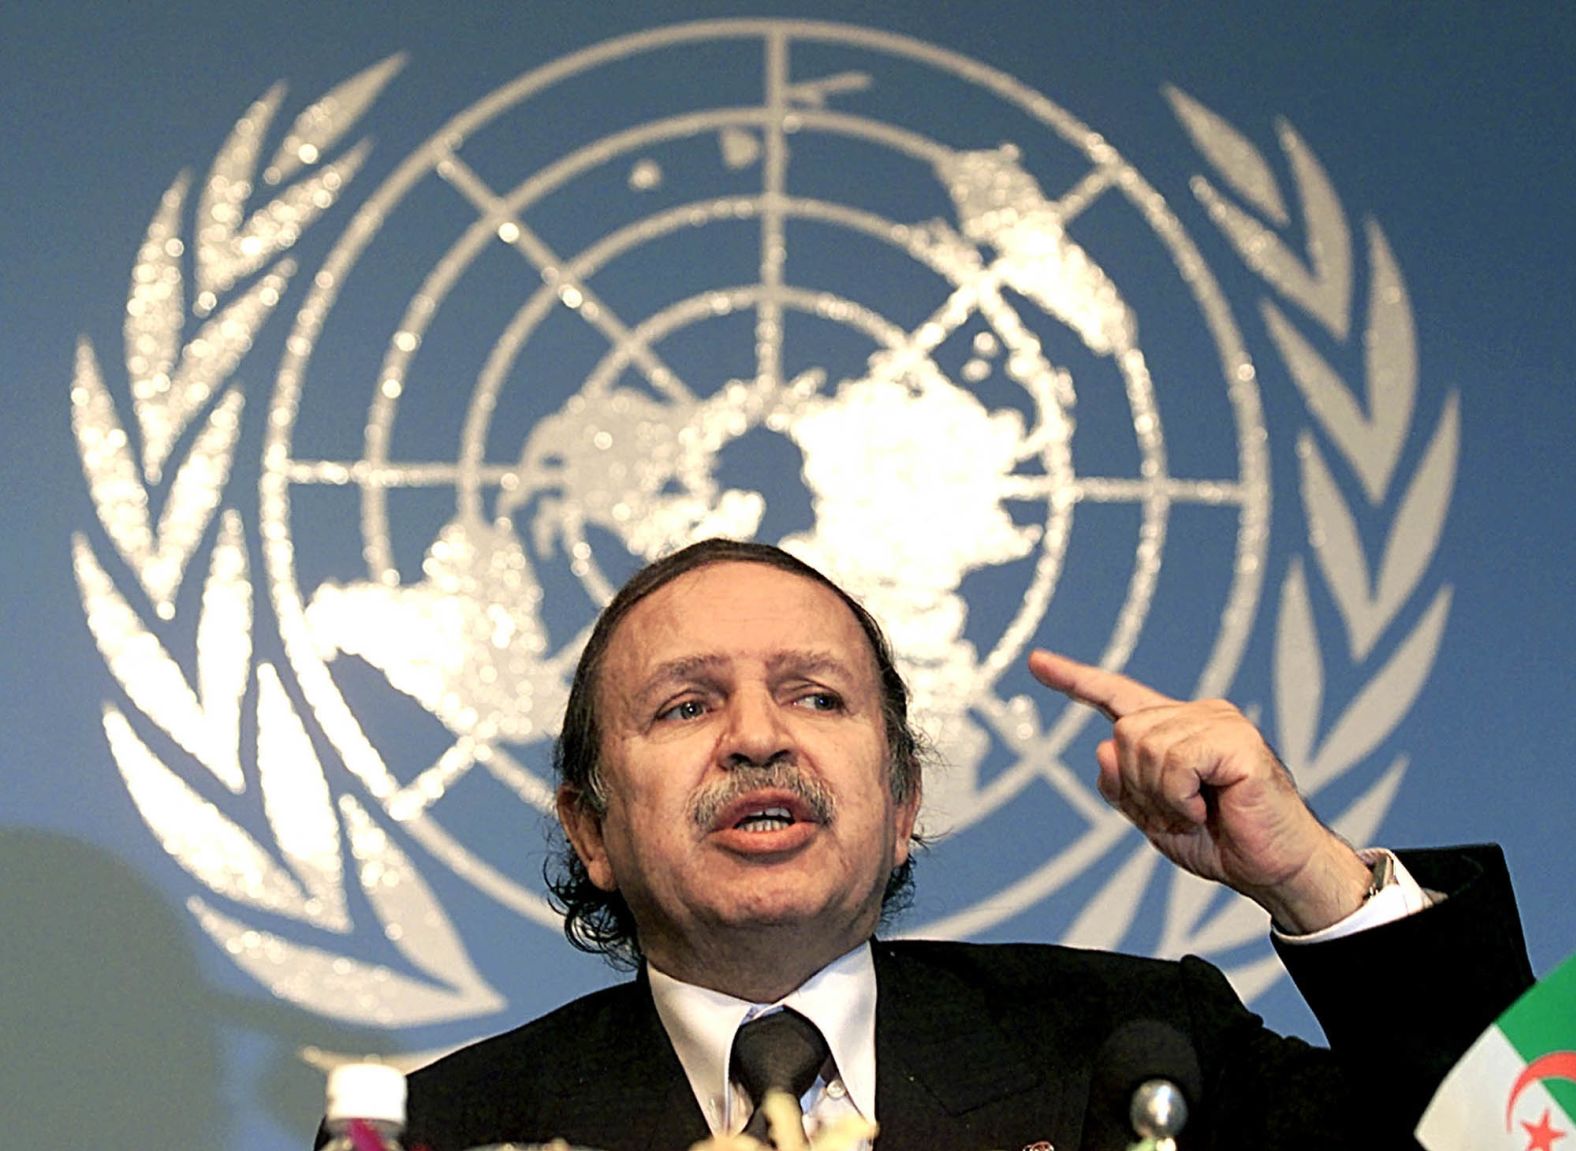 Bouteflika speaks during the United Nations Conference on Trade and Development in February 2000. Bouteflika launched a passionate attack on the West, accusing it of trying to wipe Africa off the world map by blindly pursuing economic globalization.